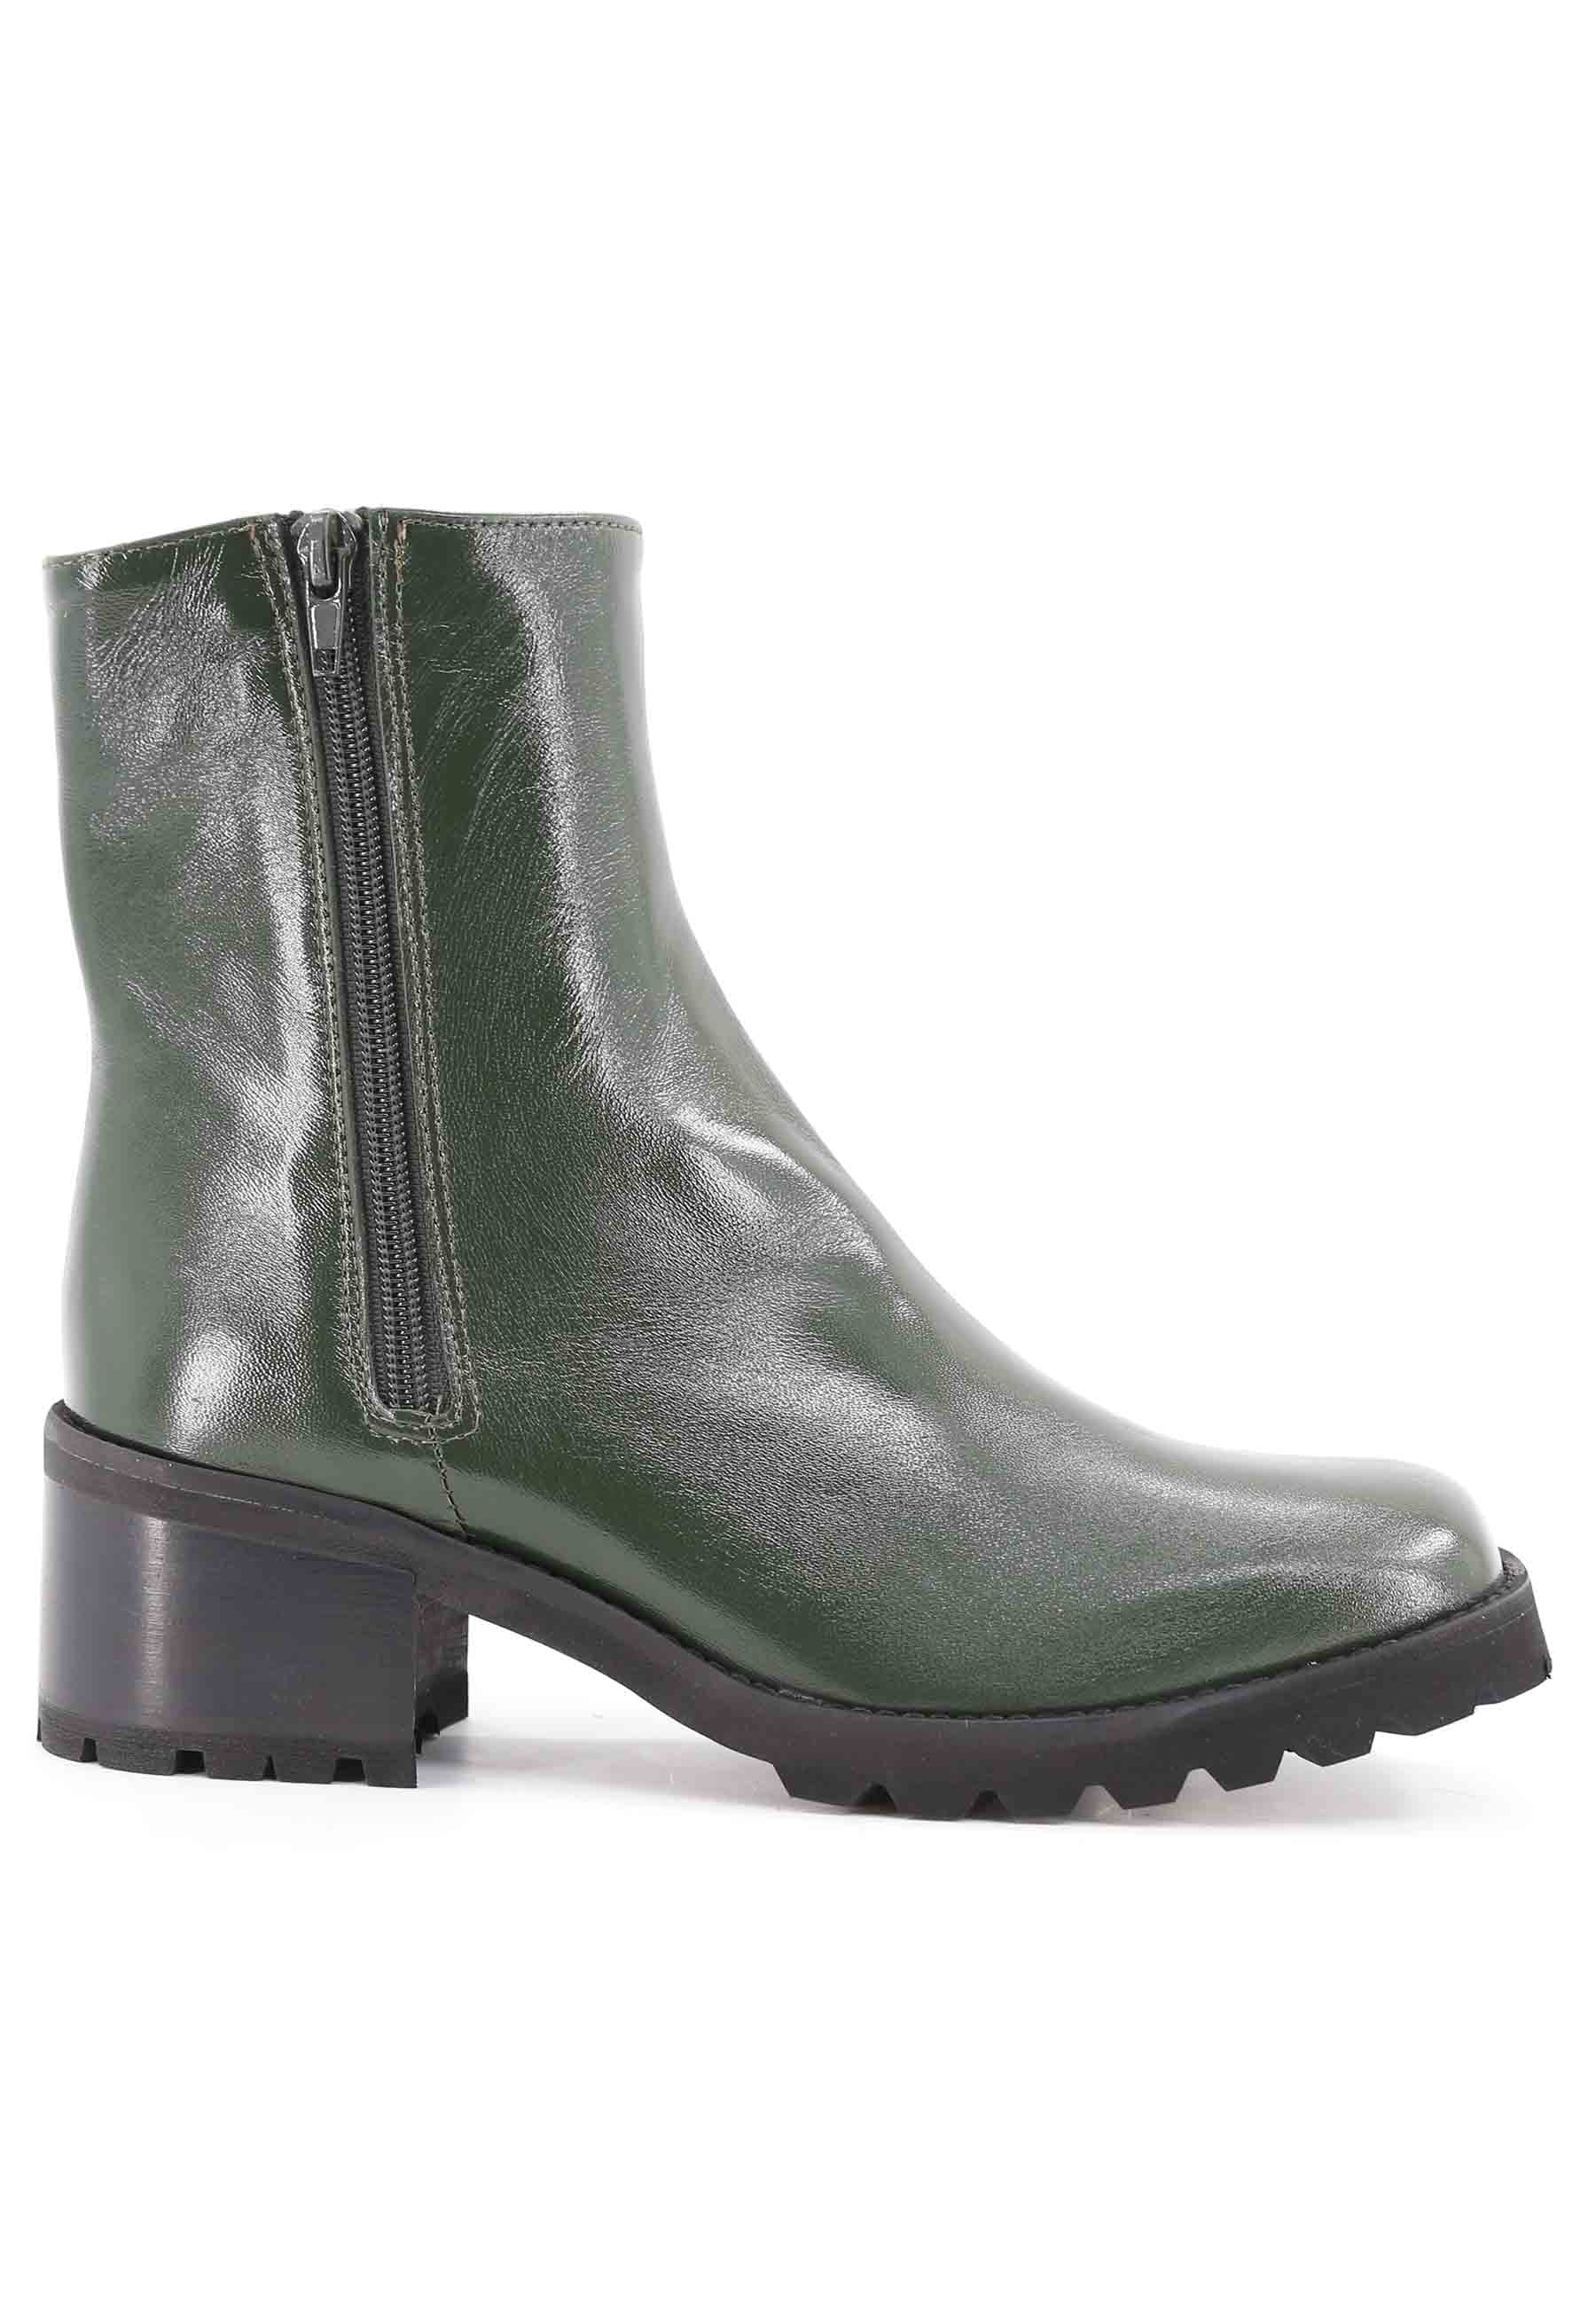 TR1665 ankle boots in green leather with lug rubber sole